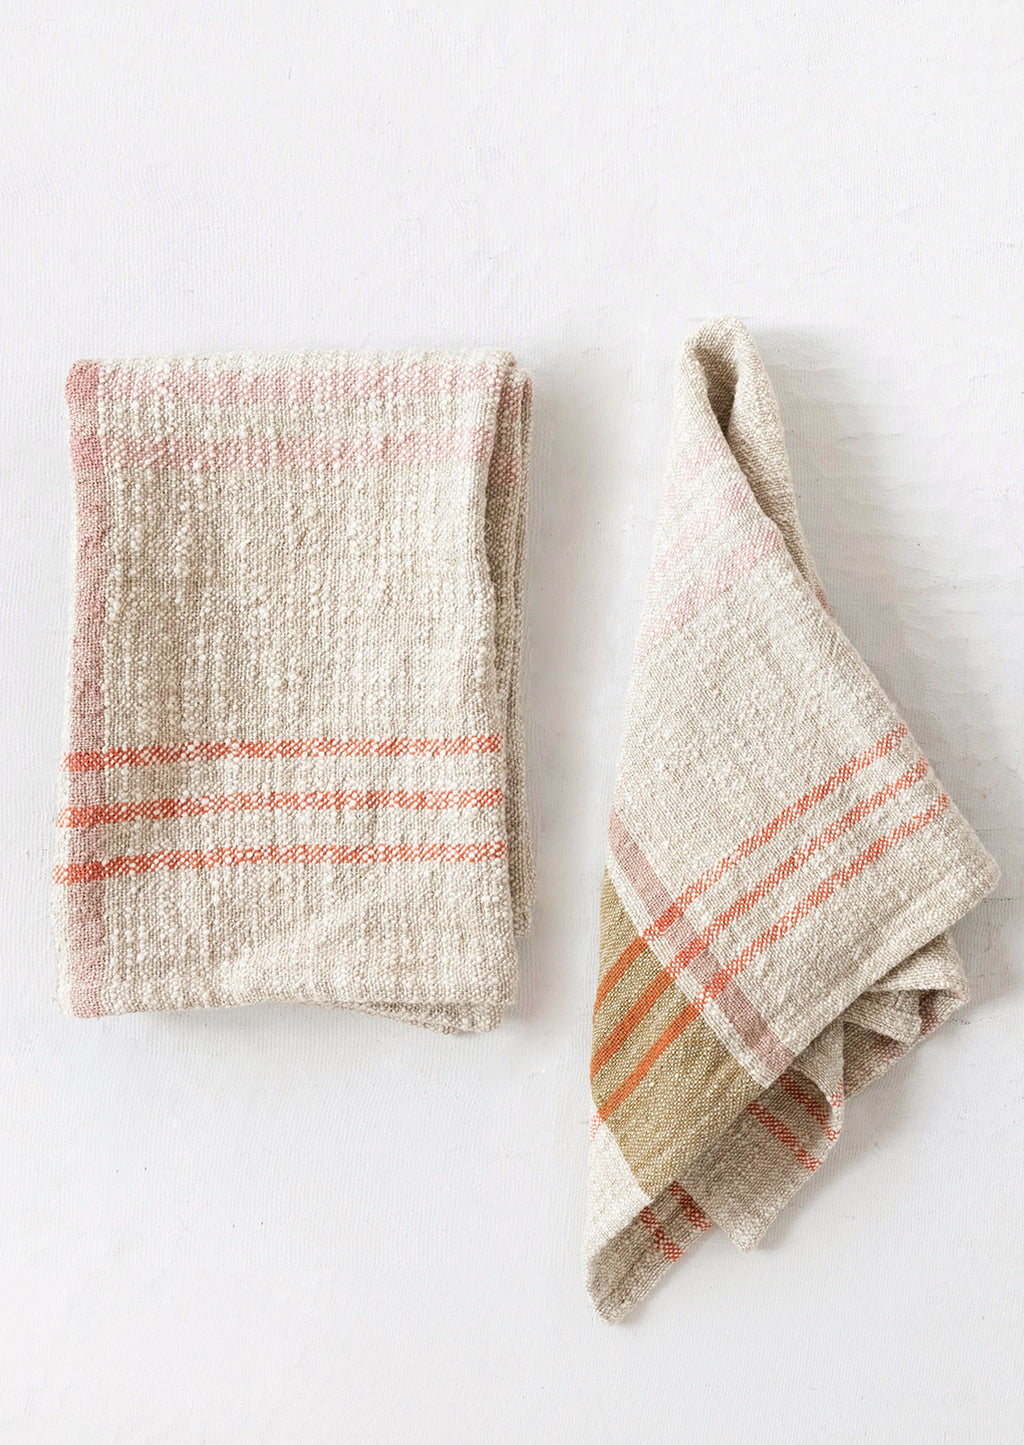 3: A natural tea towel with orange, ochre and pink plaid pattern.